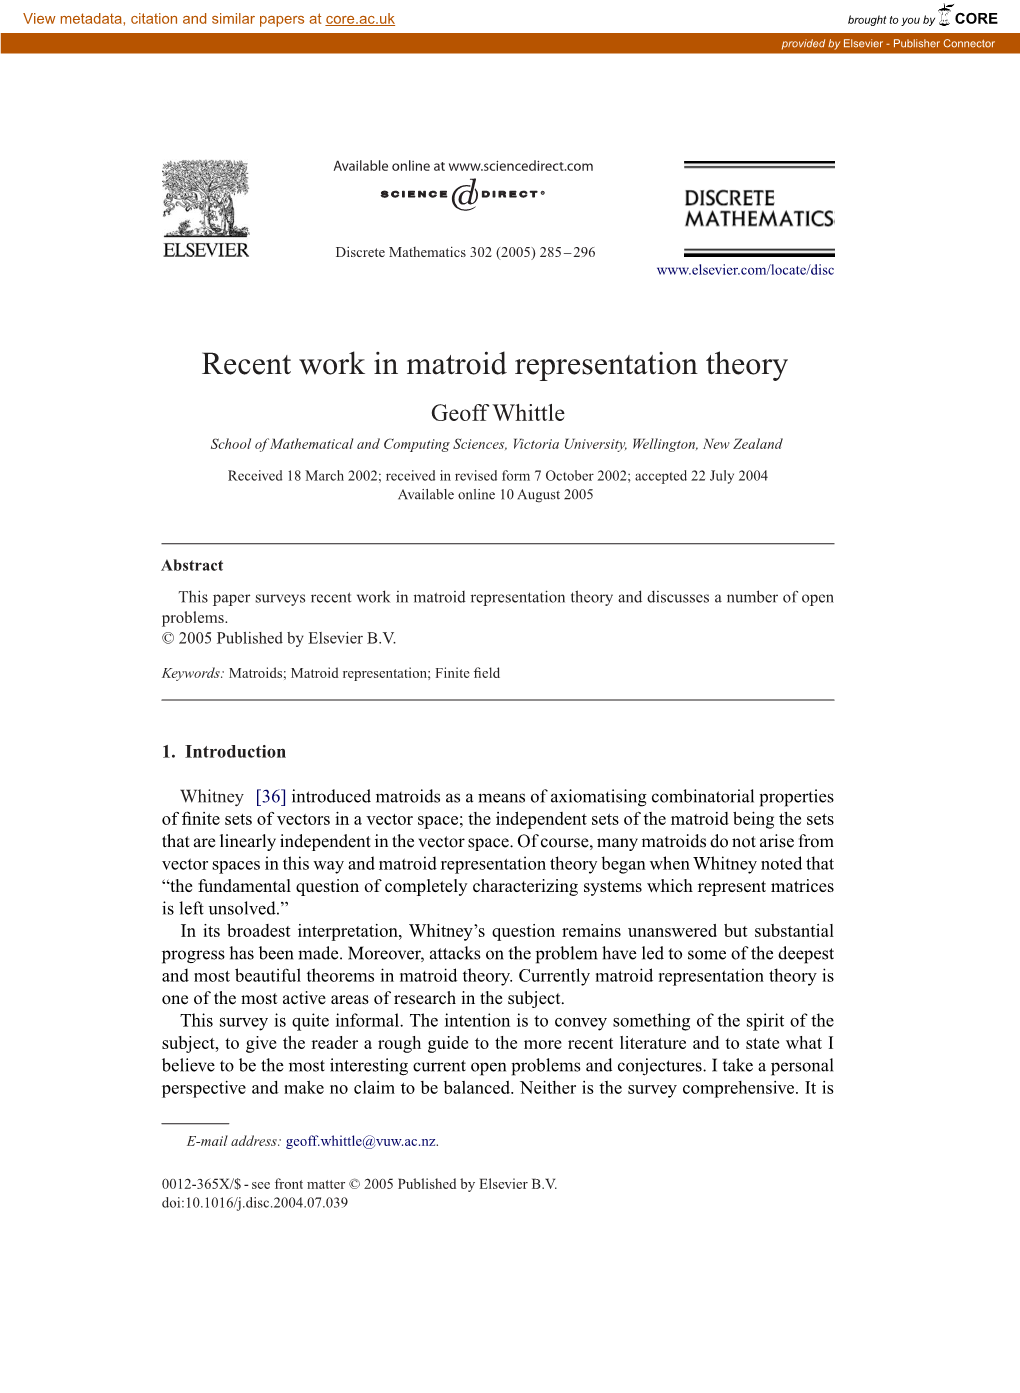 Recent Work in Matroid Representation Theory Geoff Whittle School of Mathematical and Computing Sciences, Victoria University, Wellington, New Zealand